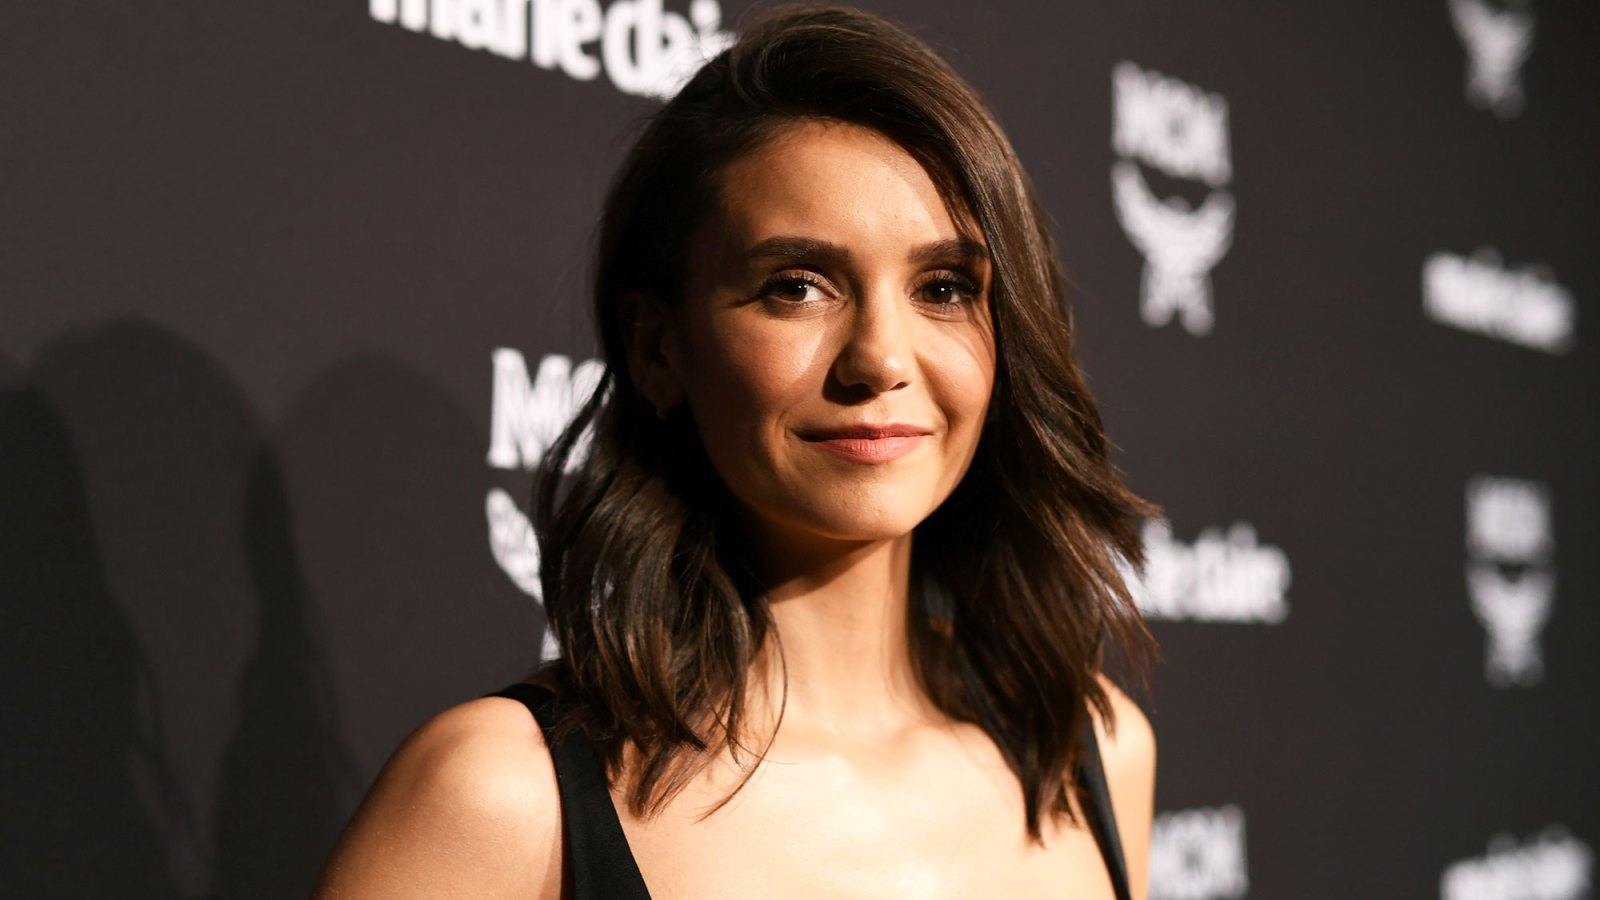 Nina Dobrev's Hairstylist Riawna Capri Says These Are the Two Key Rules to Grow Hair Out